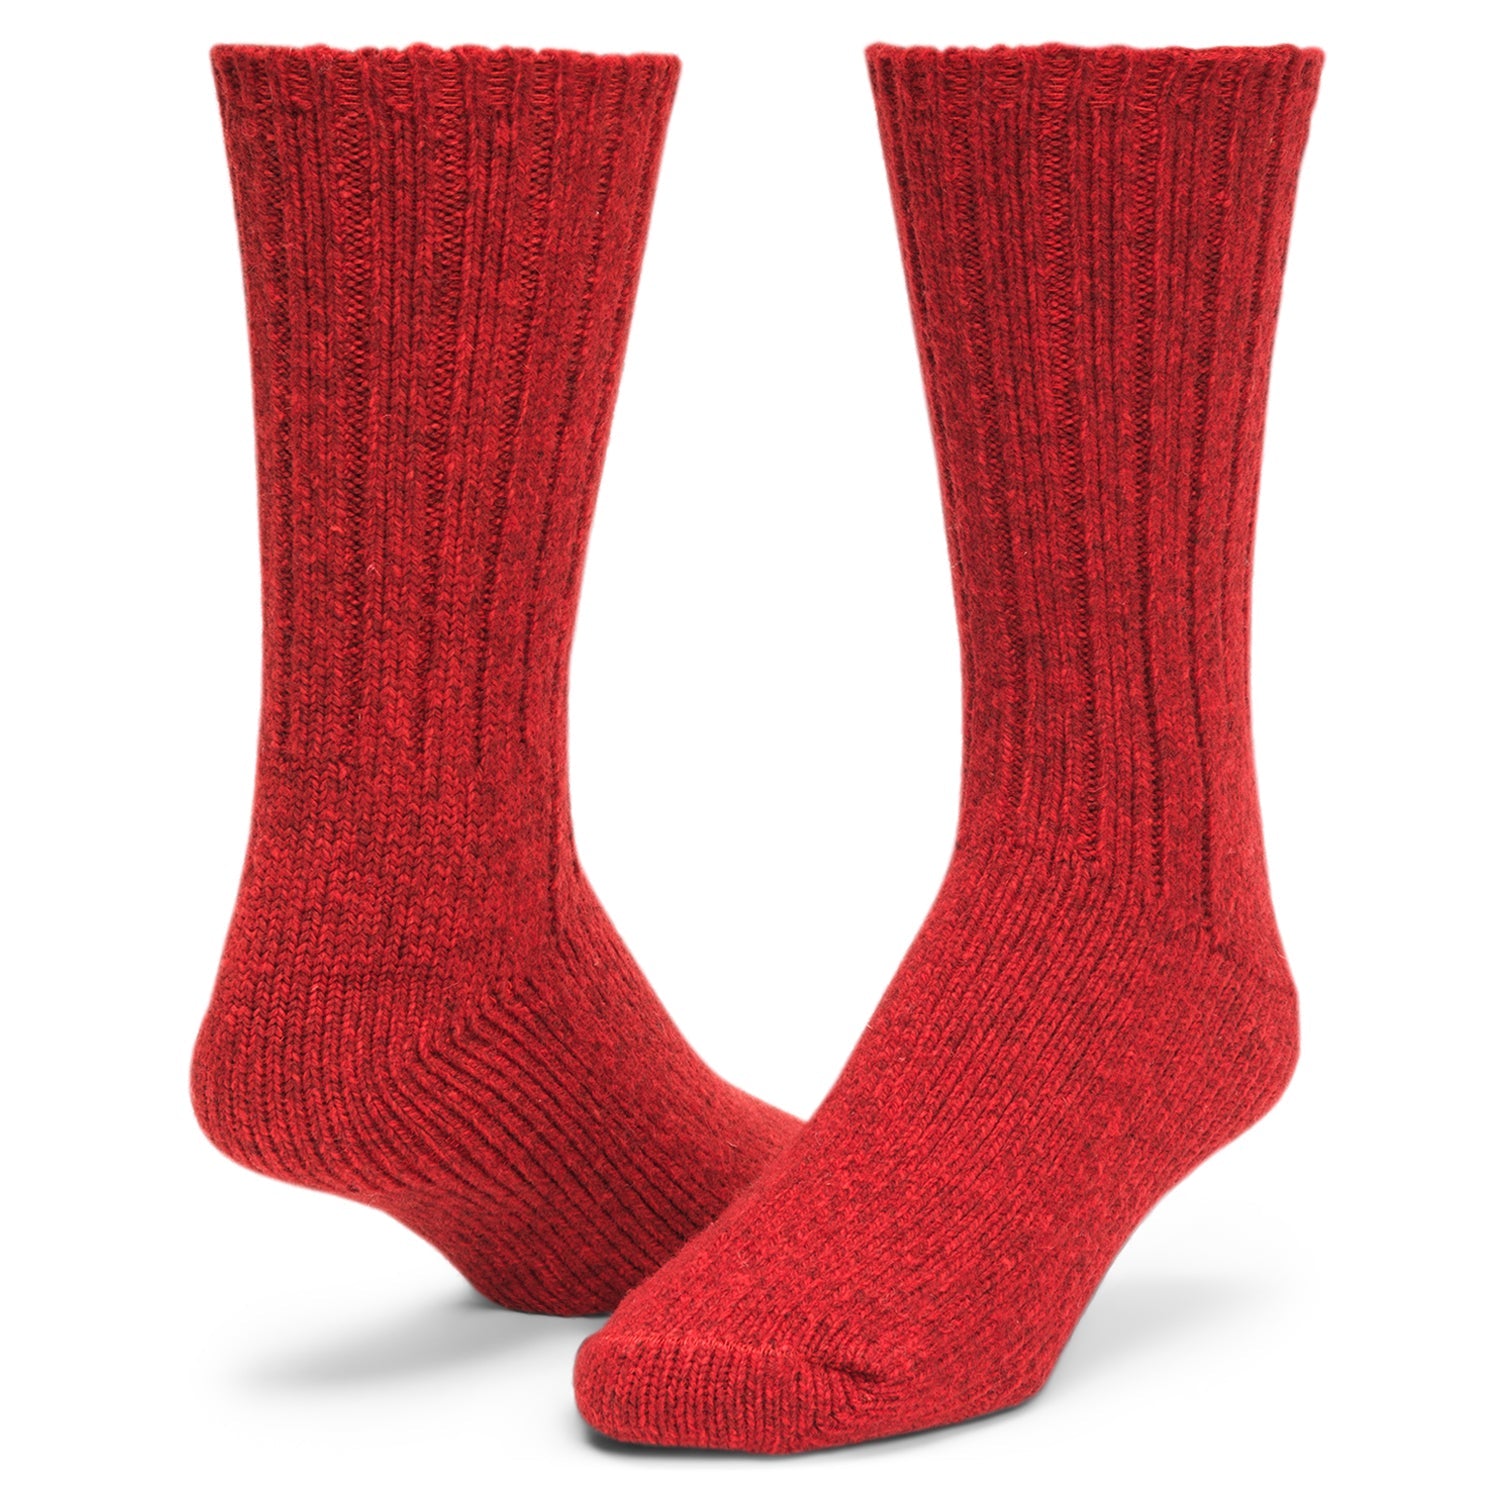 El-Pine Crew Heavyweight Wool Sock - Red Heather full product perspective - made in The USA Wigwam Socks